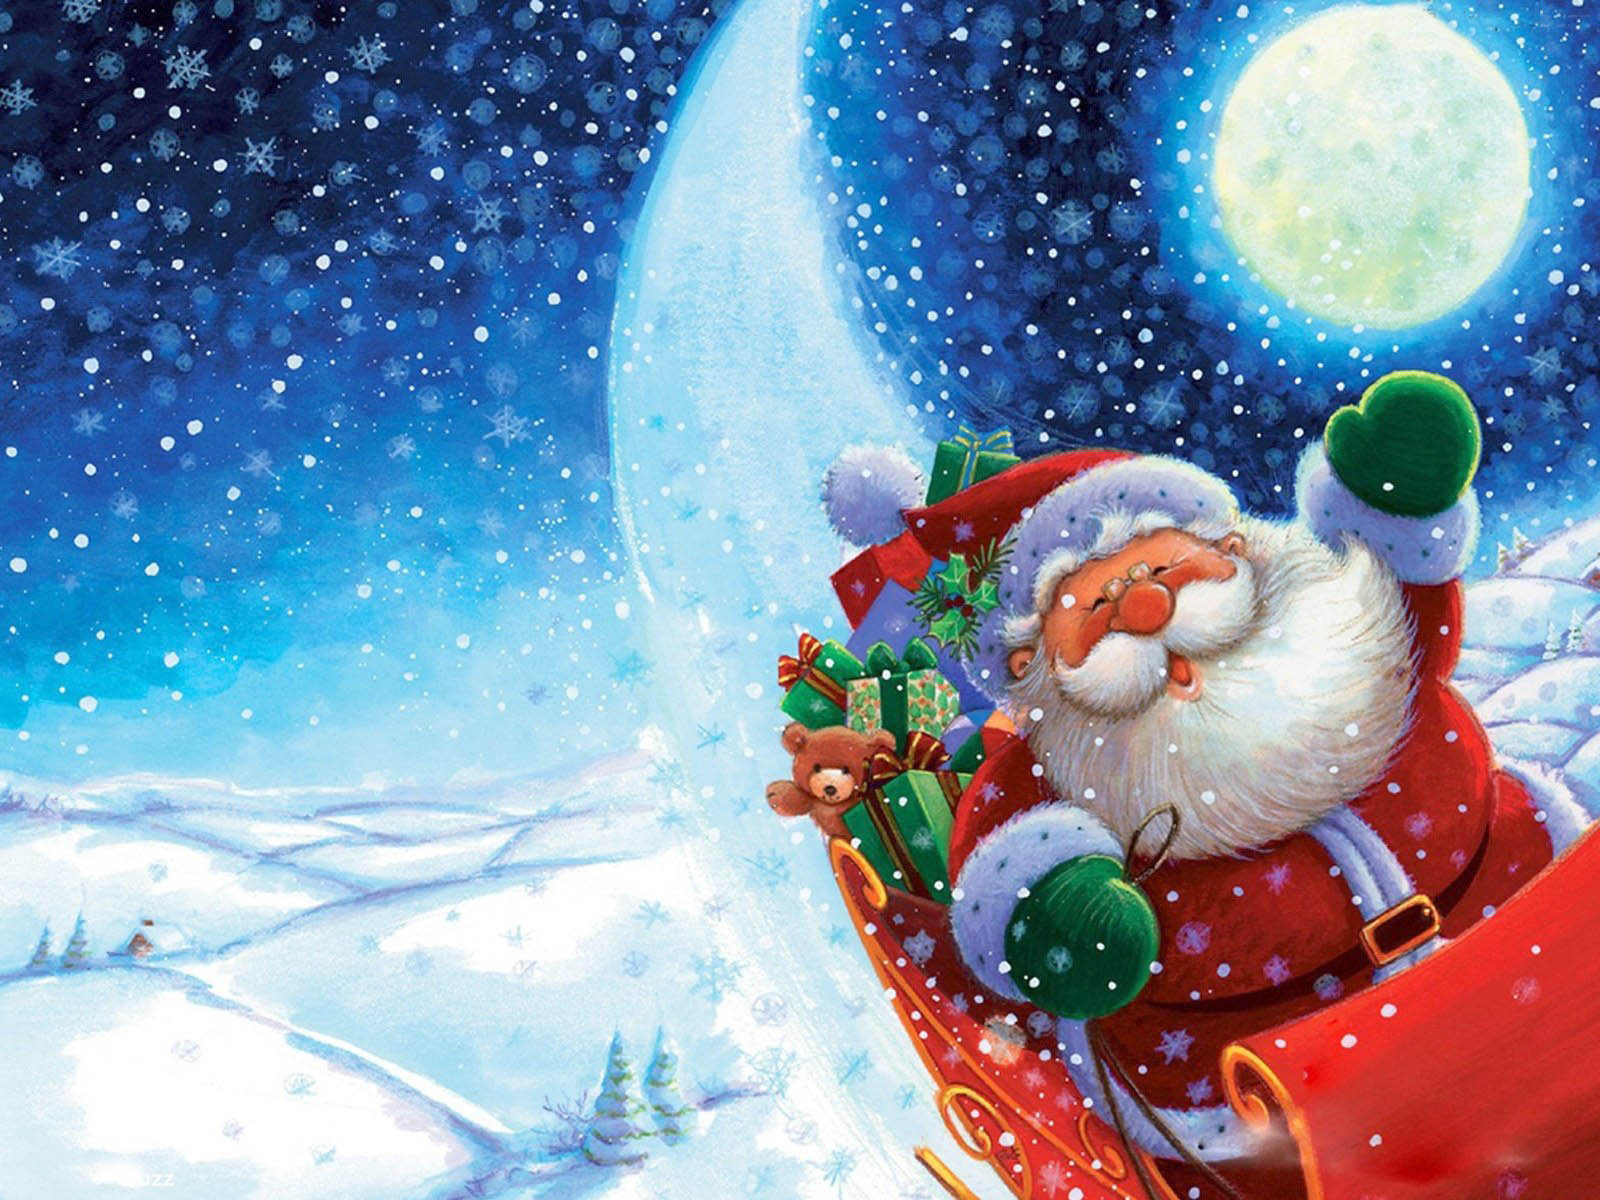 Funny Christmas wallpapers Christmas Wallpapers were very nice and